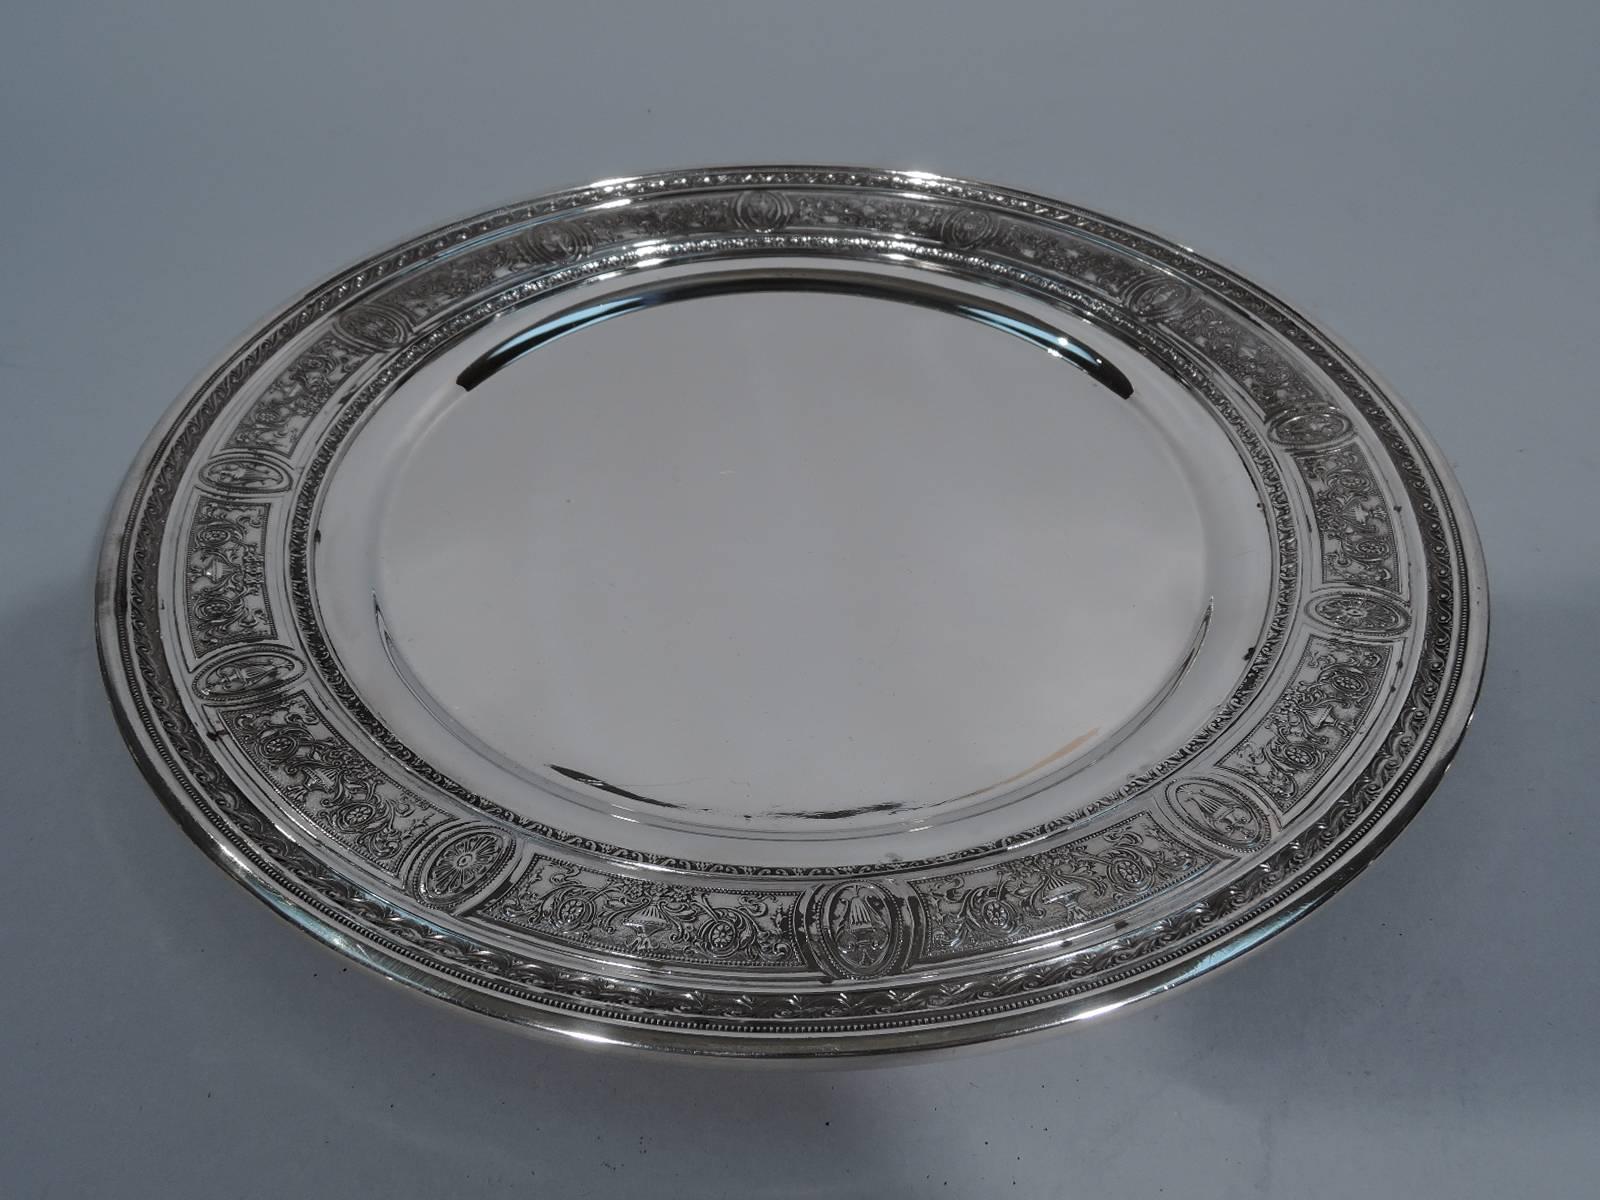 Neoclassical Revival Set of 12 Antique International Wedgwood Sterling Silver Dinner Plates